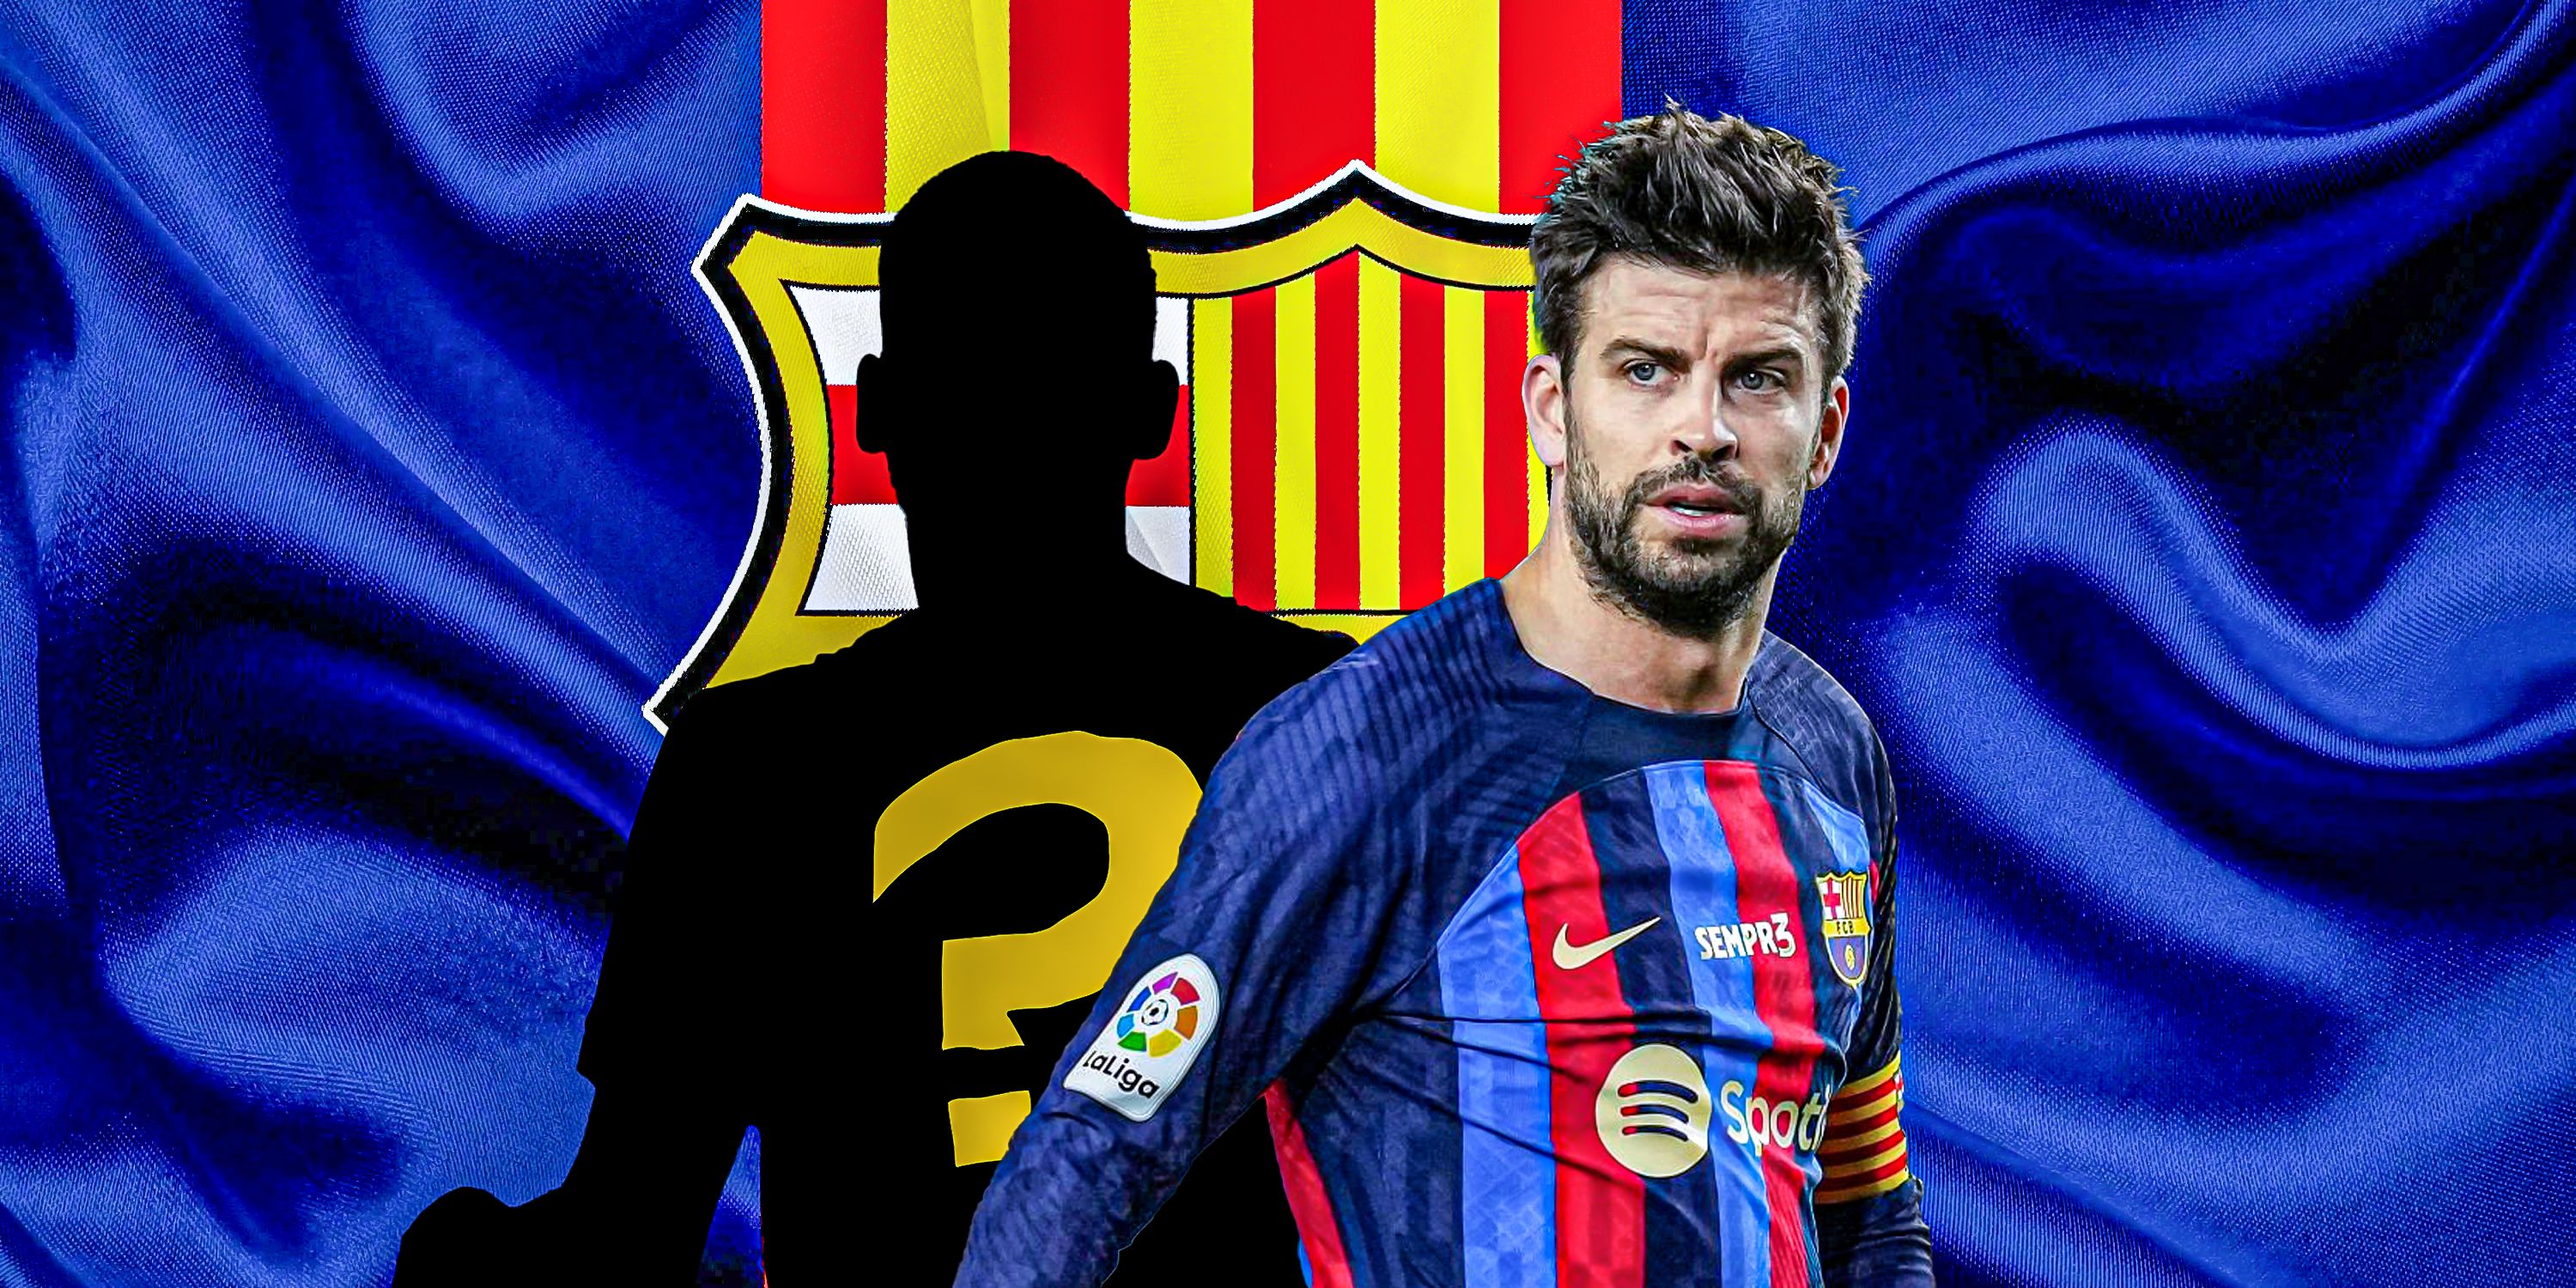 A picture of Gerard Pique's at Barcelona with silhouette of Jean-Clair Todibo and Barcelona logo/theme